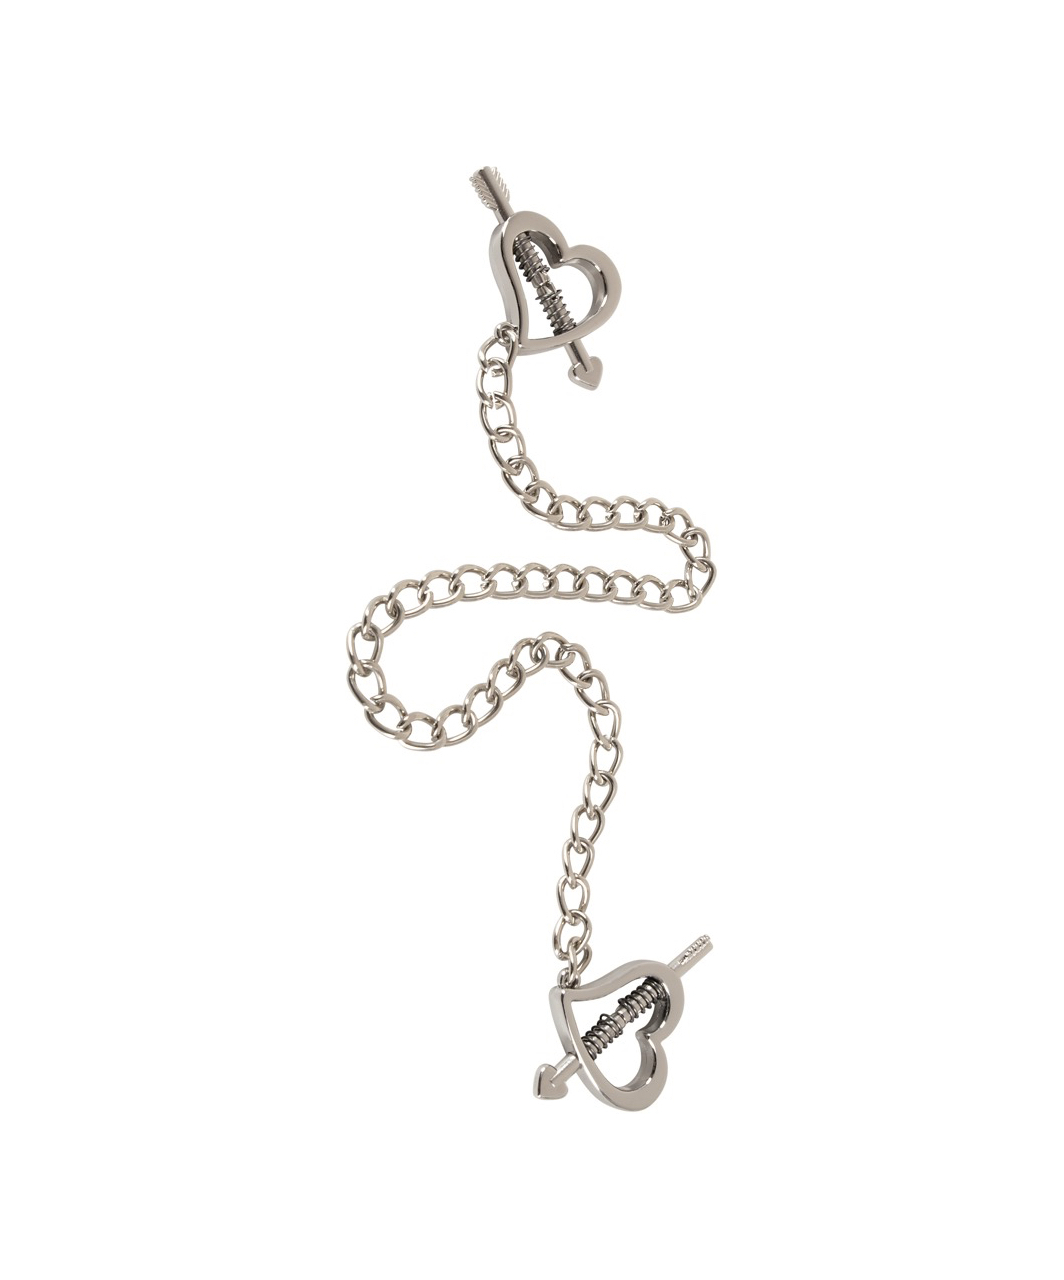 Bad Kitty heart shaped nipple clamps with chain